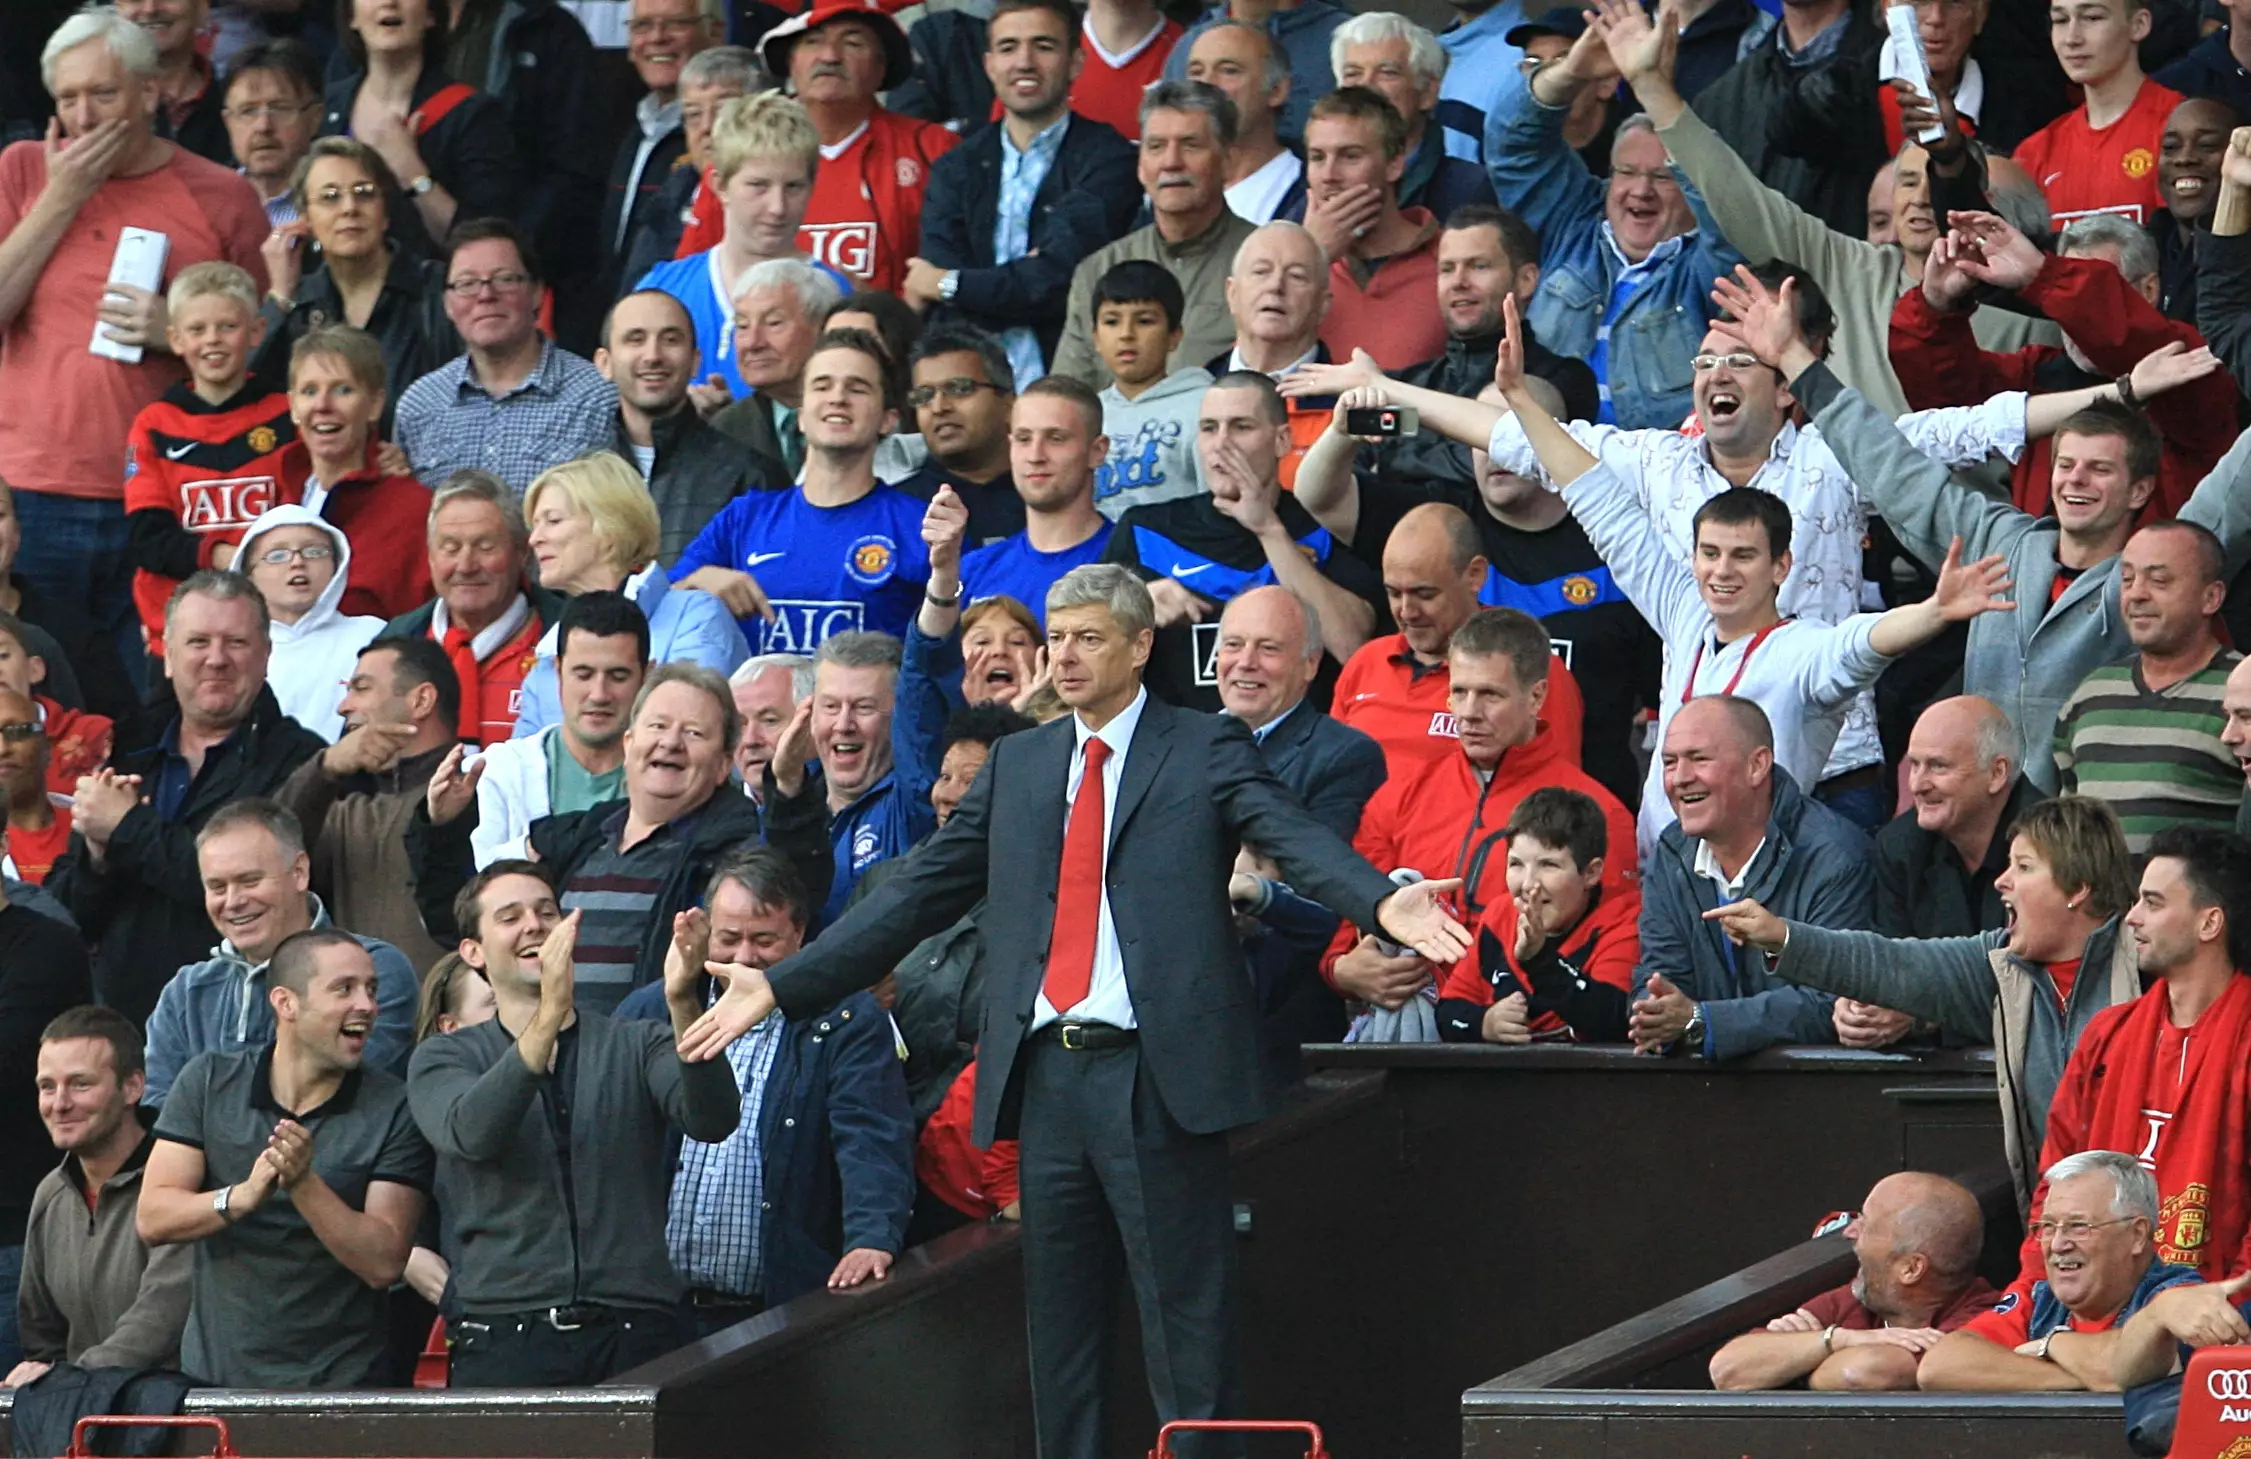 One of Wenger's most famous moments at Old Trafford. Image: PA Images